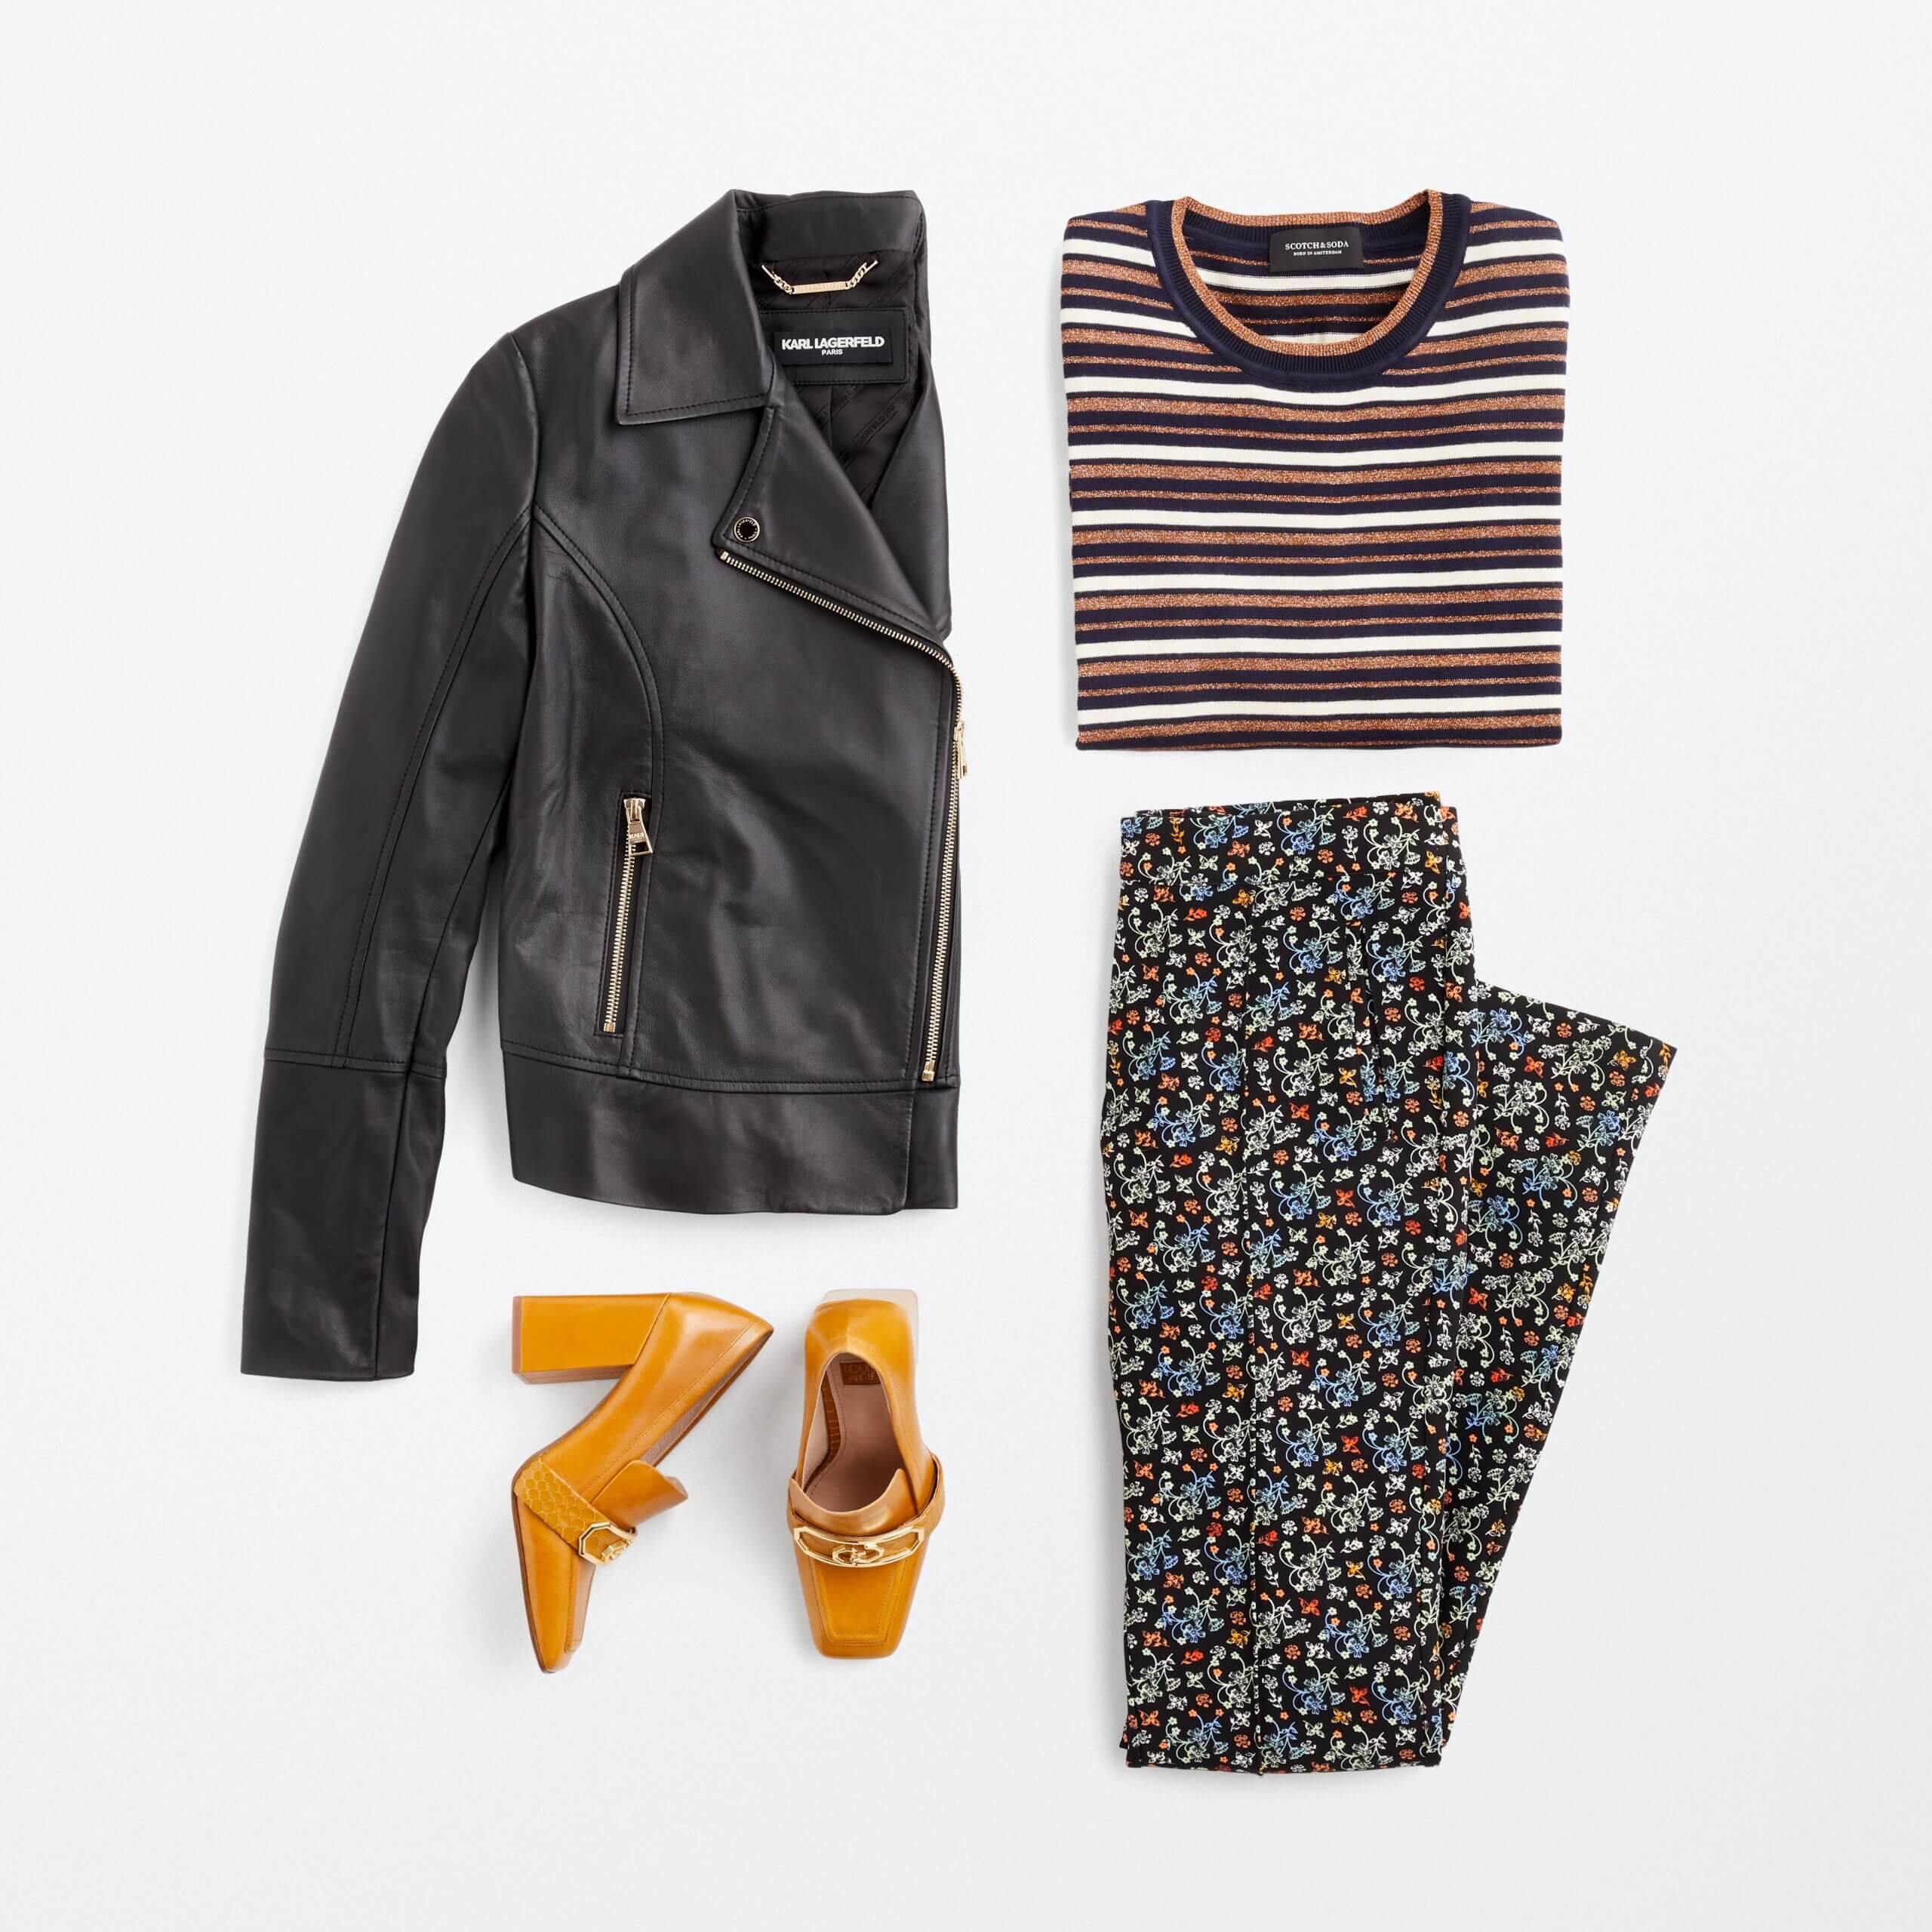 Stitch Fix women's outfit laydown featuring floral pants, striped sweater, black moto jacket and heeled mules. 